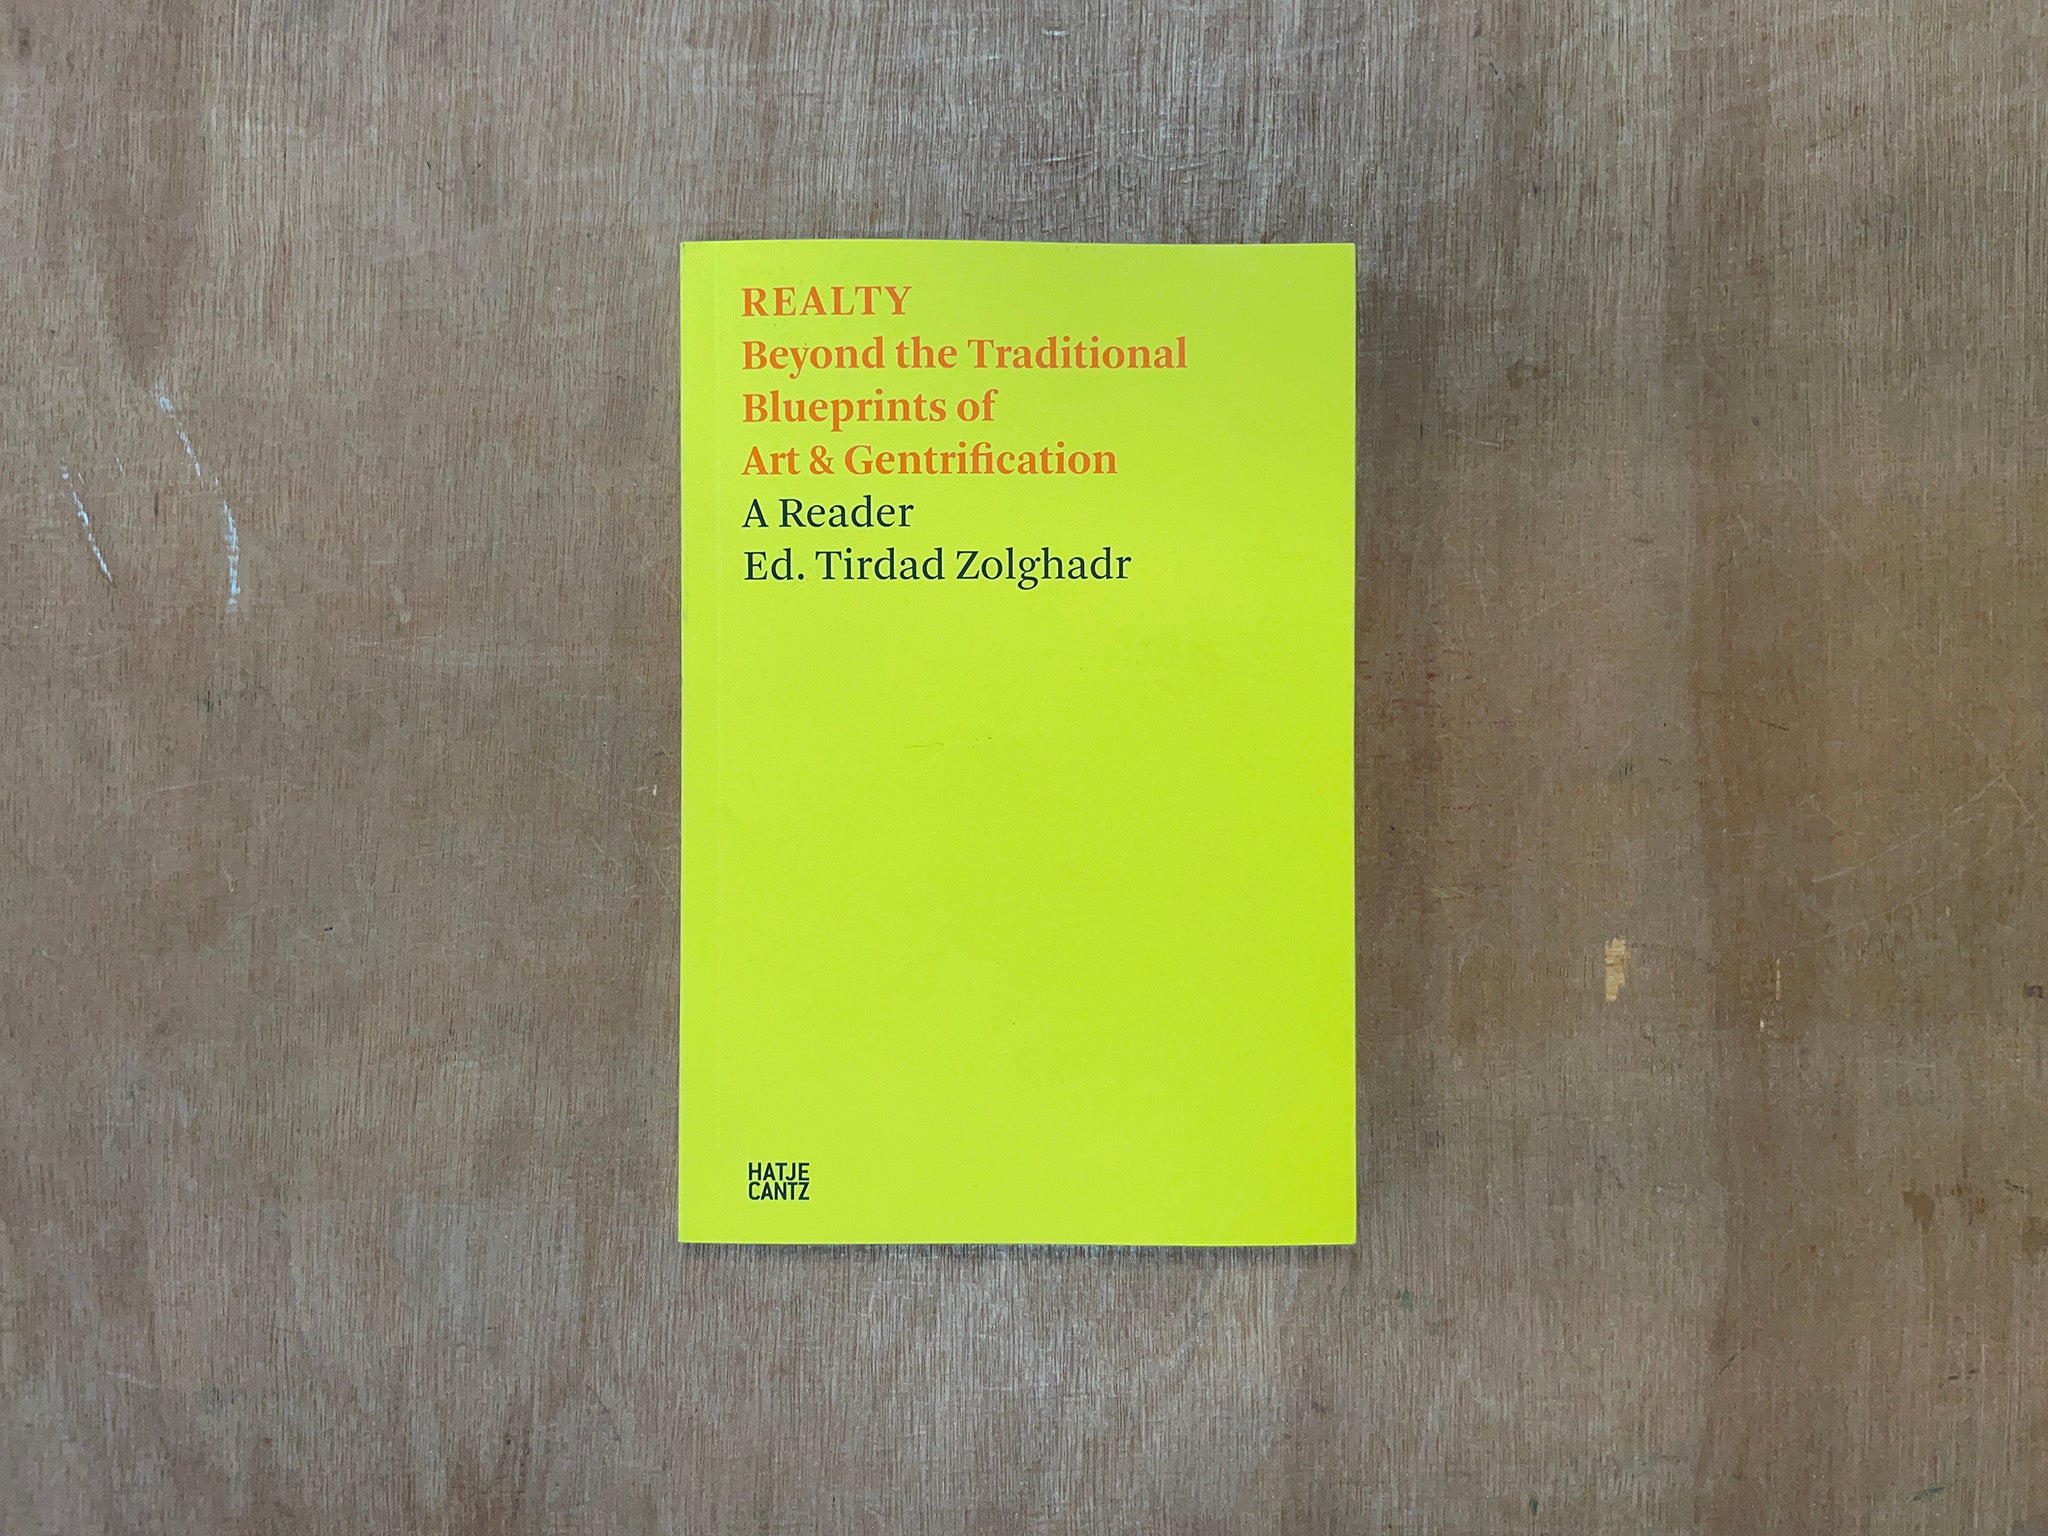 REALTY: BEYOND THE TRADITIONAL BLUEPRINTS OF ART & GENTRIFICATION Edited by Tirdad Zolghadr